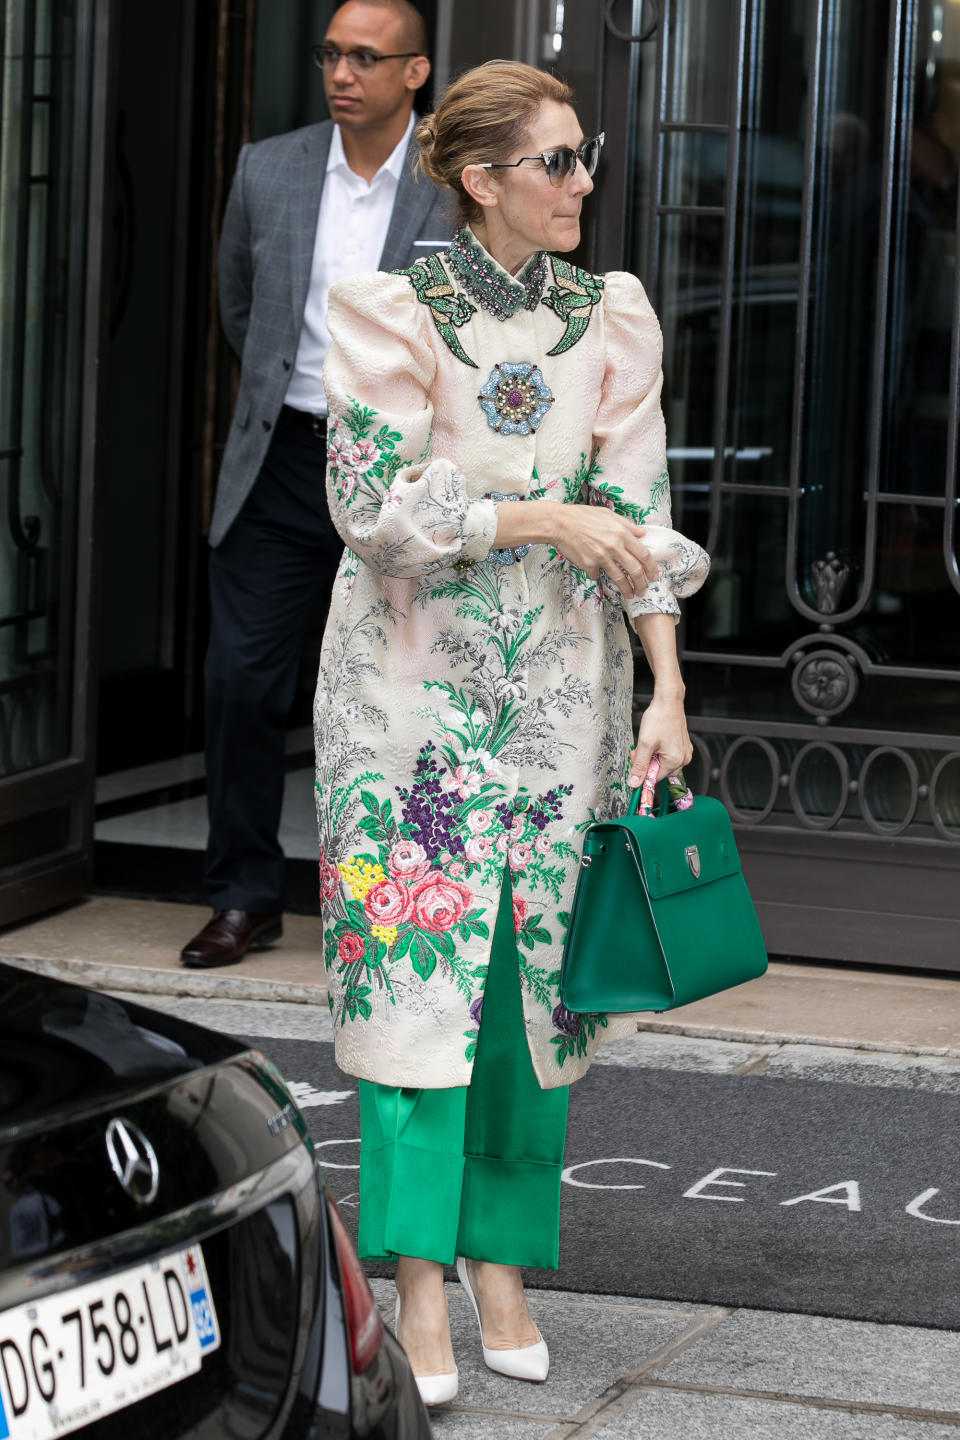 Keeping warm in Paris, the singer dressed in a seriously chic Gucci floral coat back in July 2017. A co-ordinating Dior bag finished the high-fashion ensemble. [Photo: Getty]